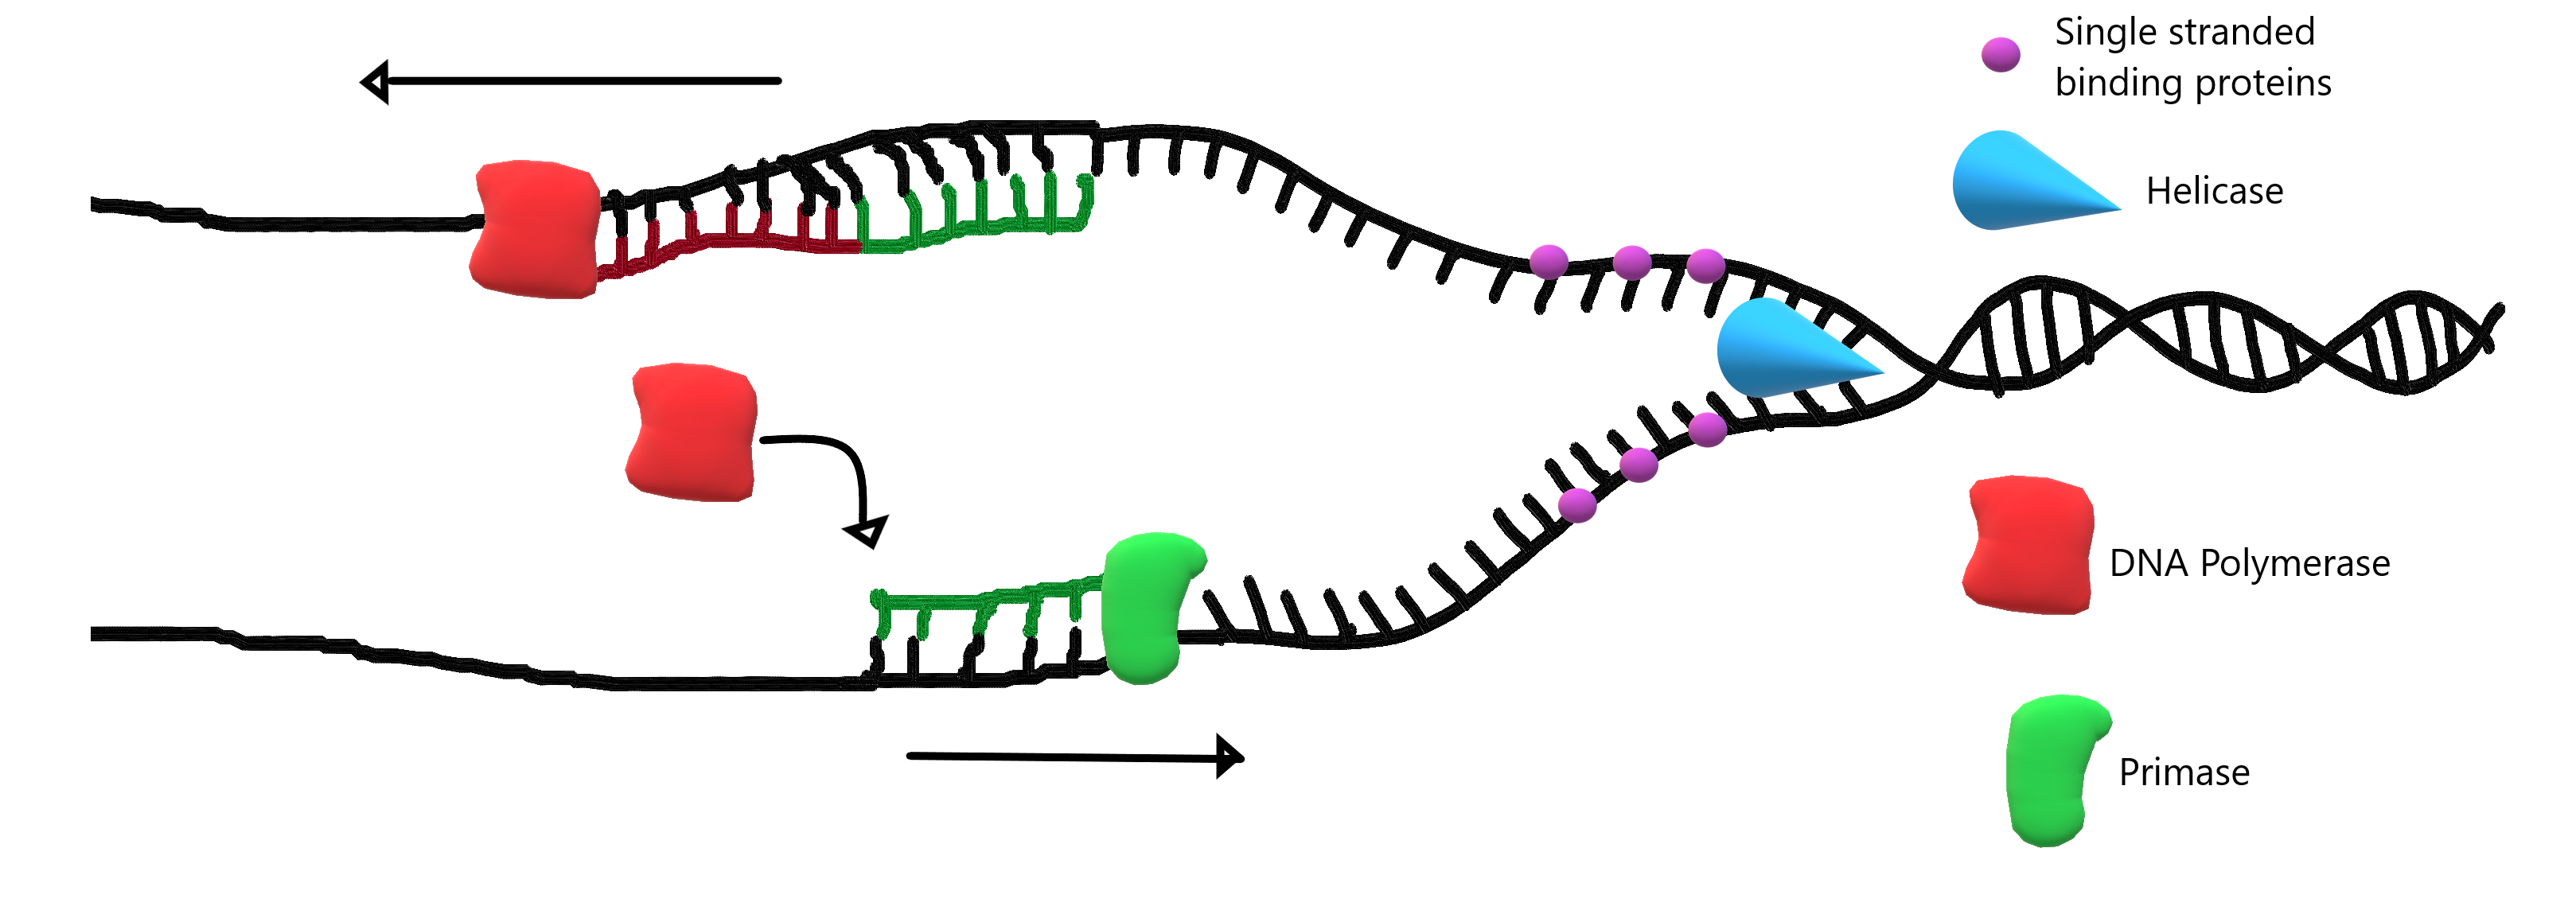 Image shows a diagram of DNA replication. Helicase is separating the two strands of DNA, single stranded binding proteins are holding open the strand of DNA. Primase is laying down primer sequences to cue DNA polymerase where to begin synthesizing the new strand of DNA